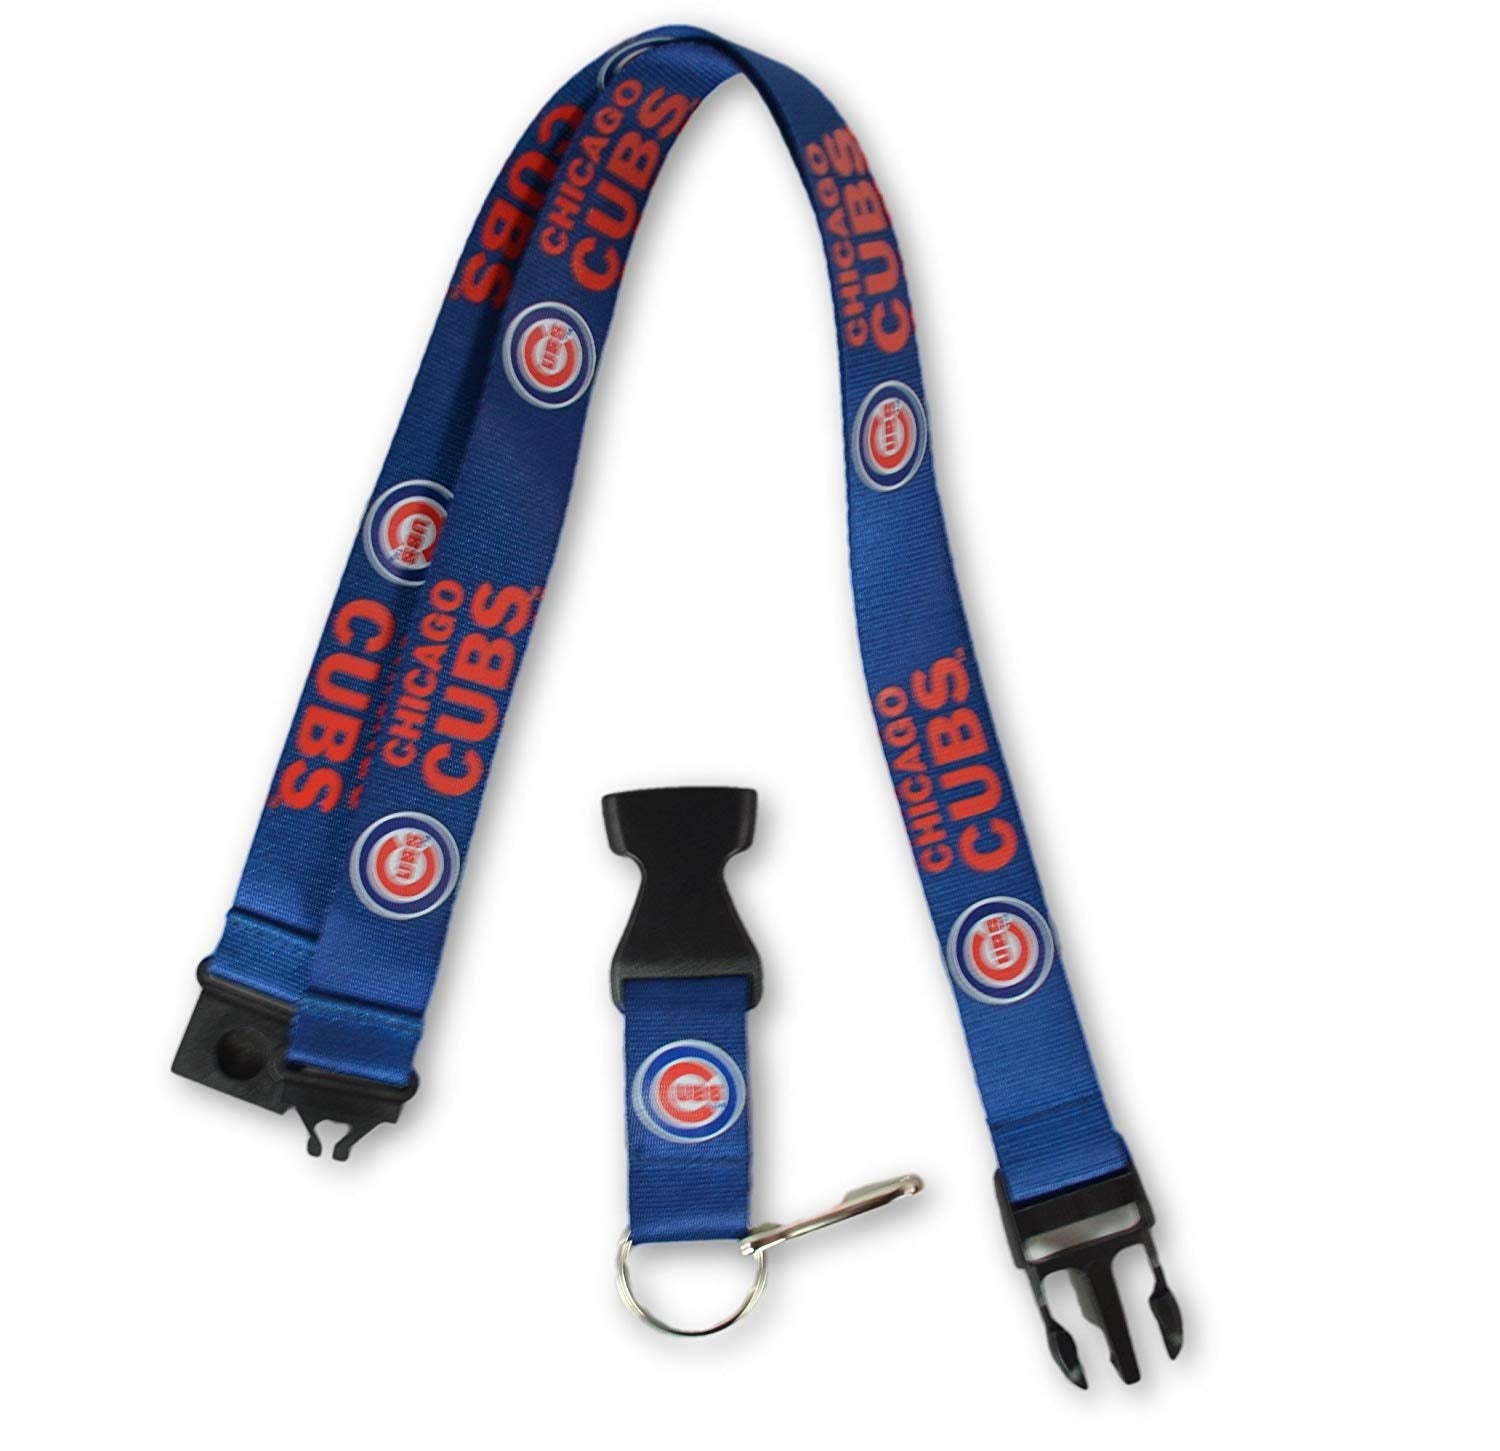 PSG INC Official Major League Baseball Fan Shop Authentic 2-pack MLB Lanyards/keychains Badge Holder